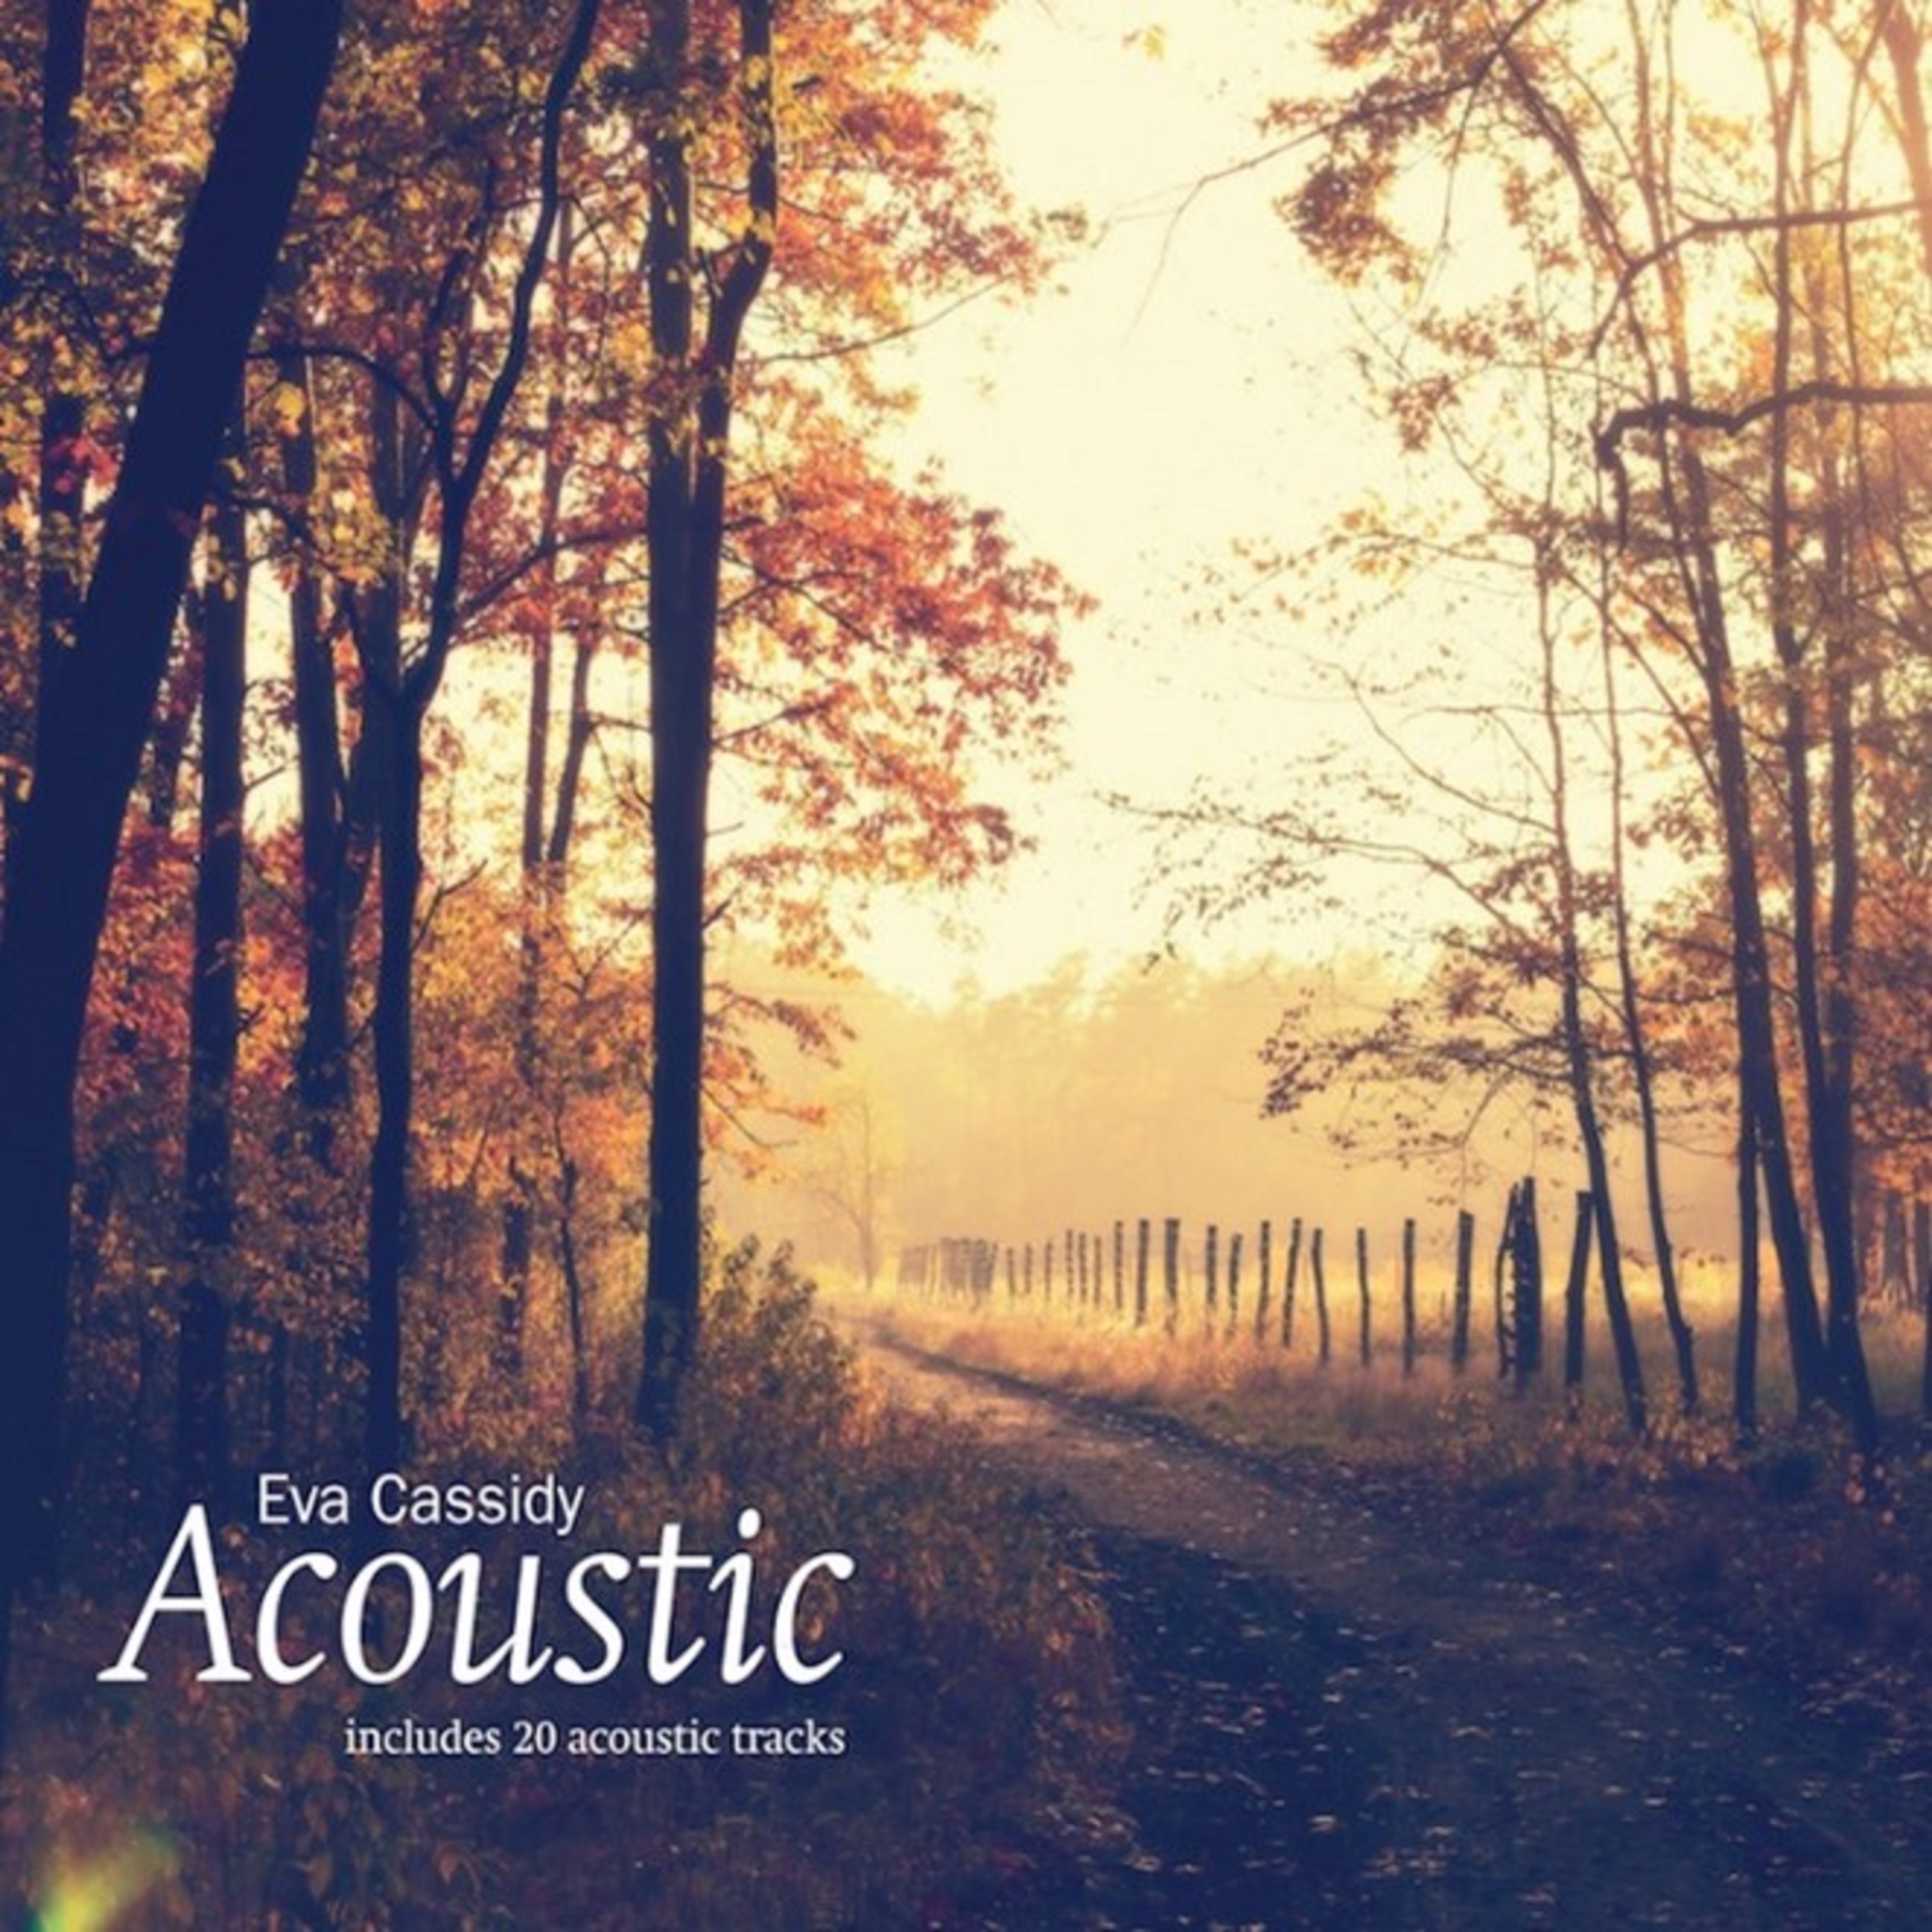 BLIX STREET RECORDS TO RELEASE EVA CASSIDY ACOUSTIC ALBUM ON JANUARY 15